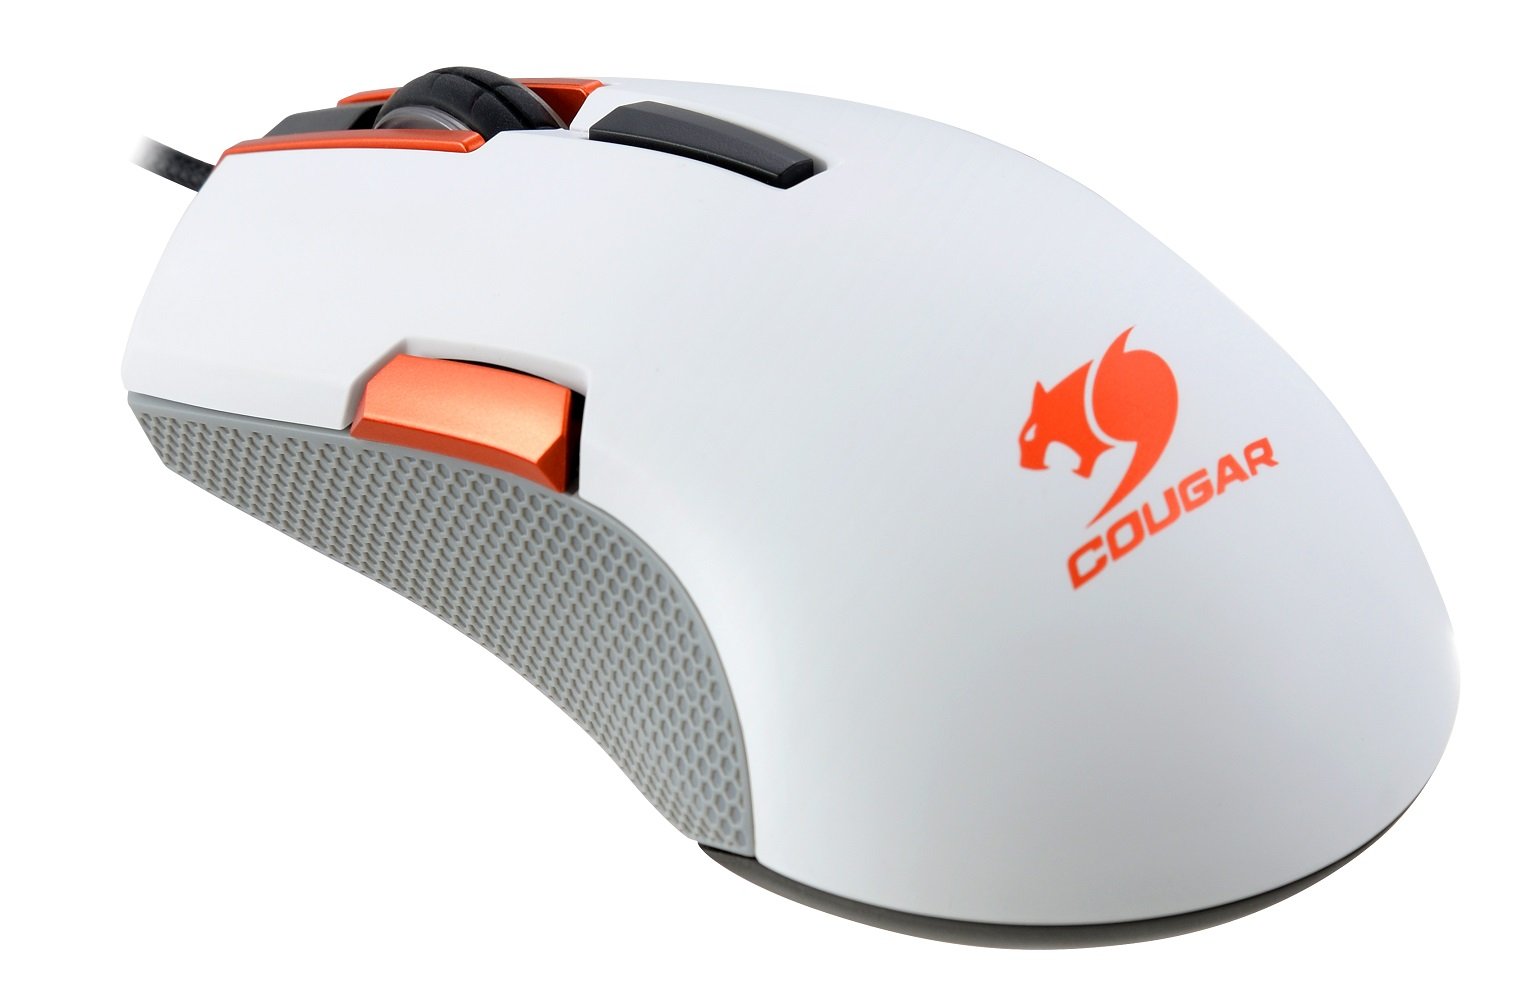 COUGAR Makes Pro Gaming Affordable with 230M and 250M 3